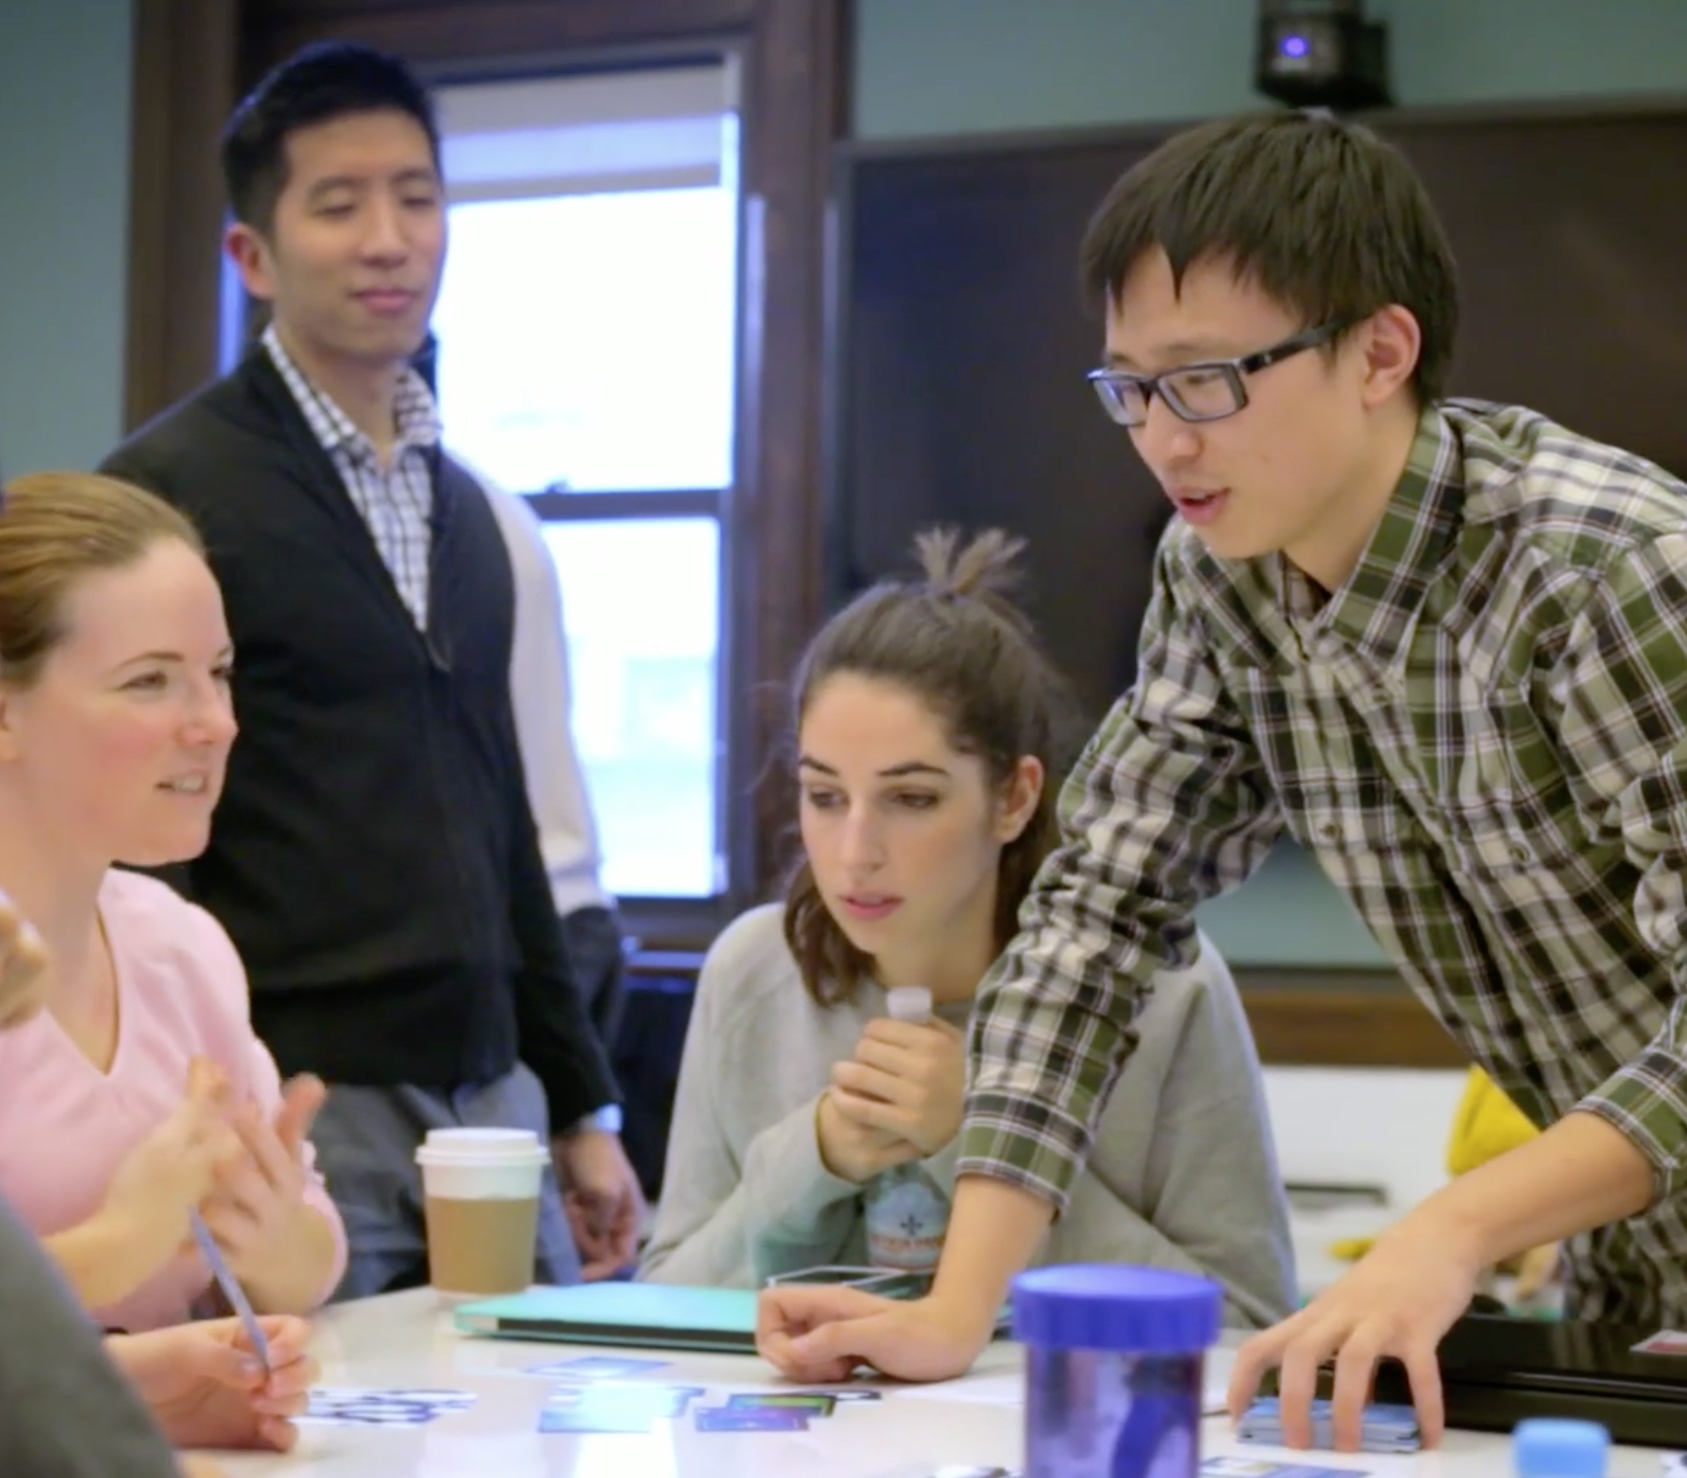 ALPHA PHASE Faculty member Joey Lee (standing, left) with members of a student project team. The teams worked with experienced researchers and mentors to critically examine their process and work.